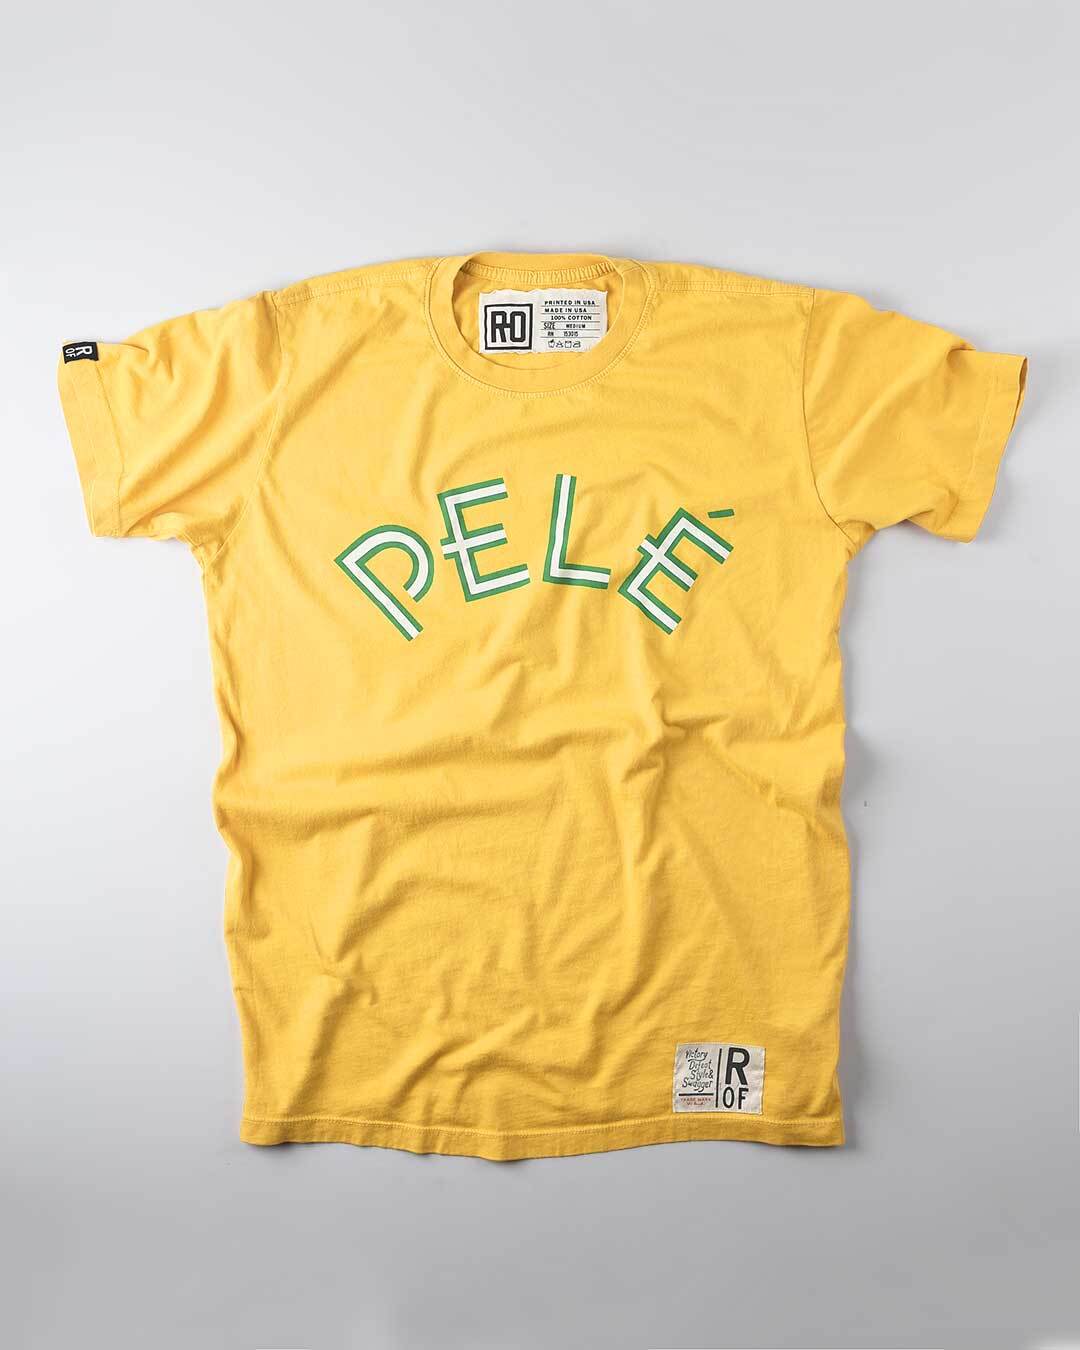 Pelé Brasil #10 Yellow Tee - Roots of Fight Canada